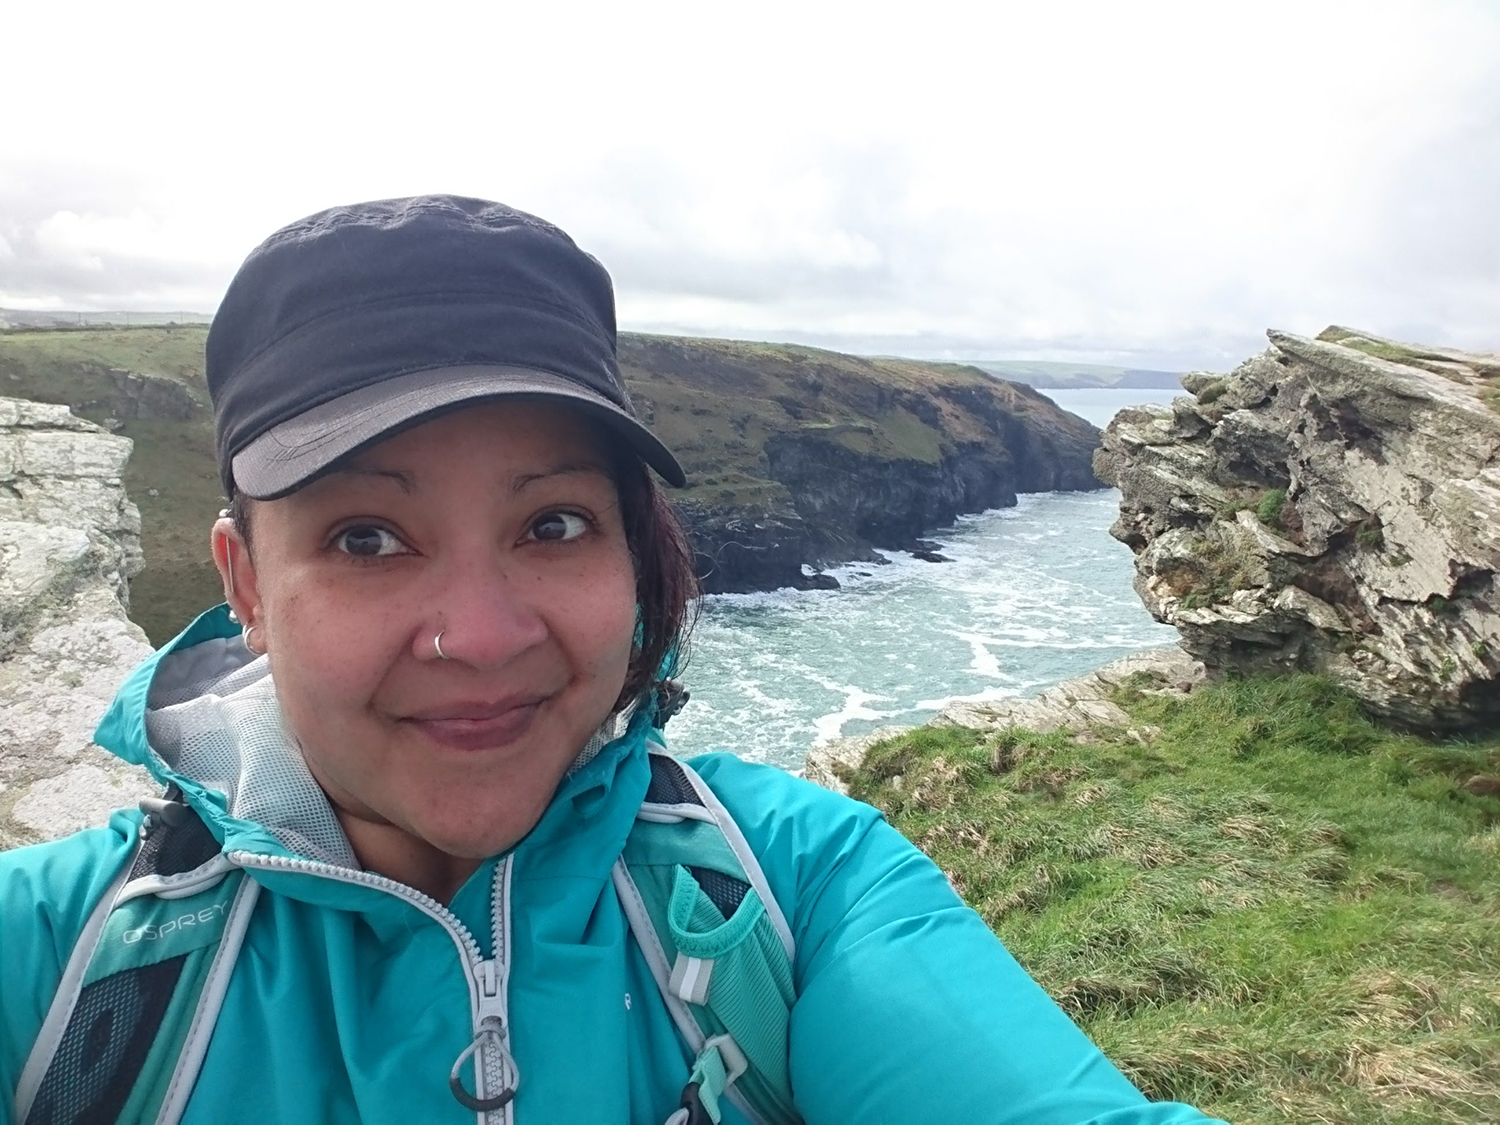 Me in Tintagel wearing my Osprey Tempest